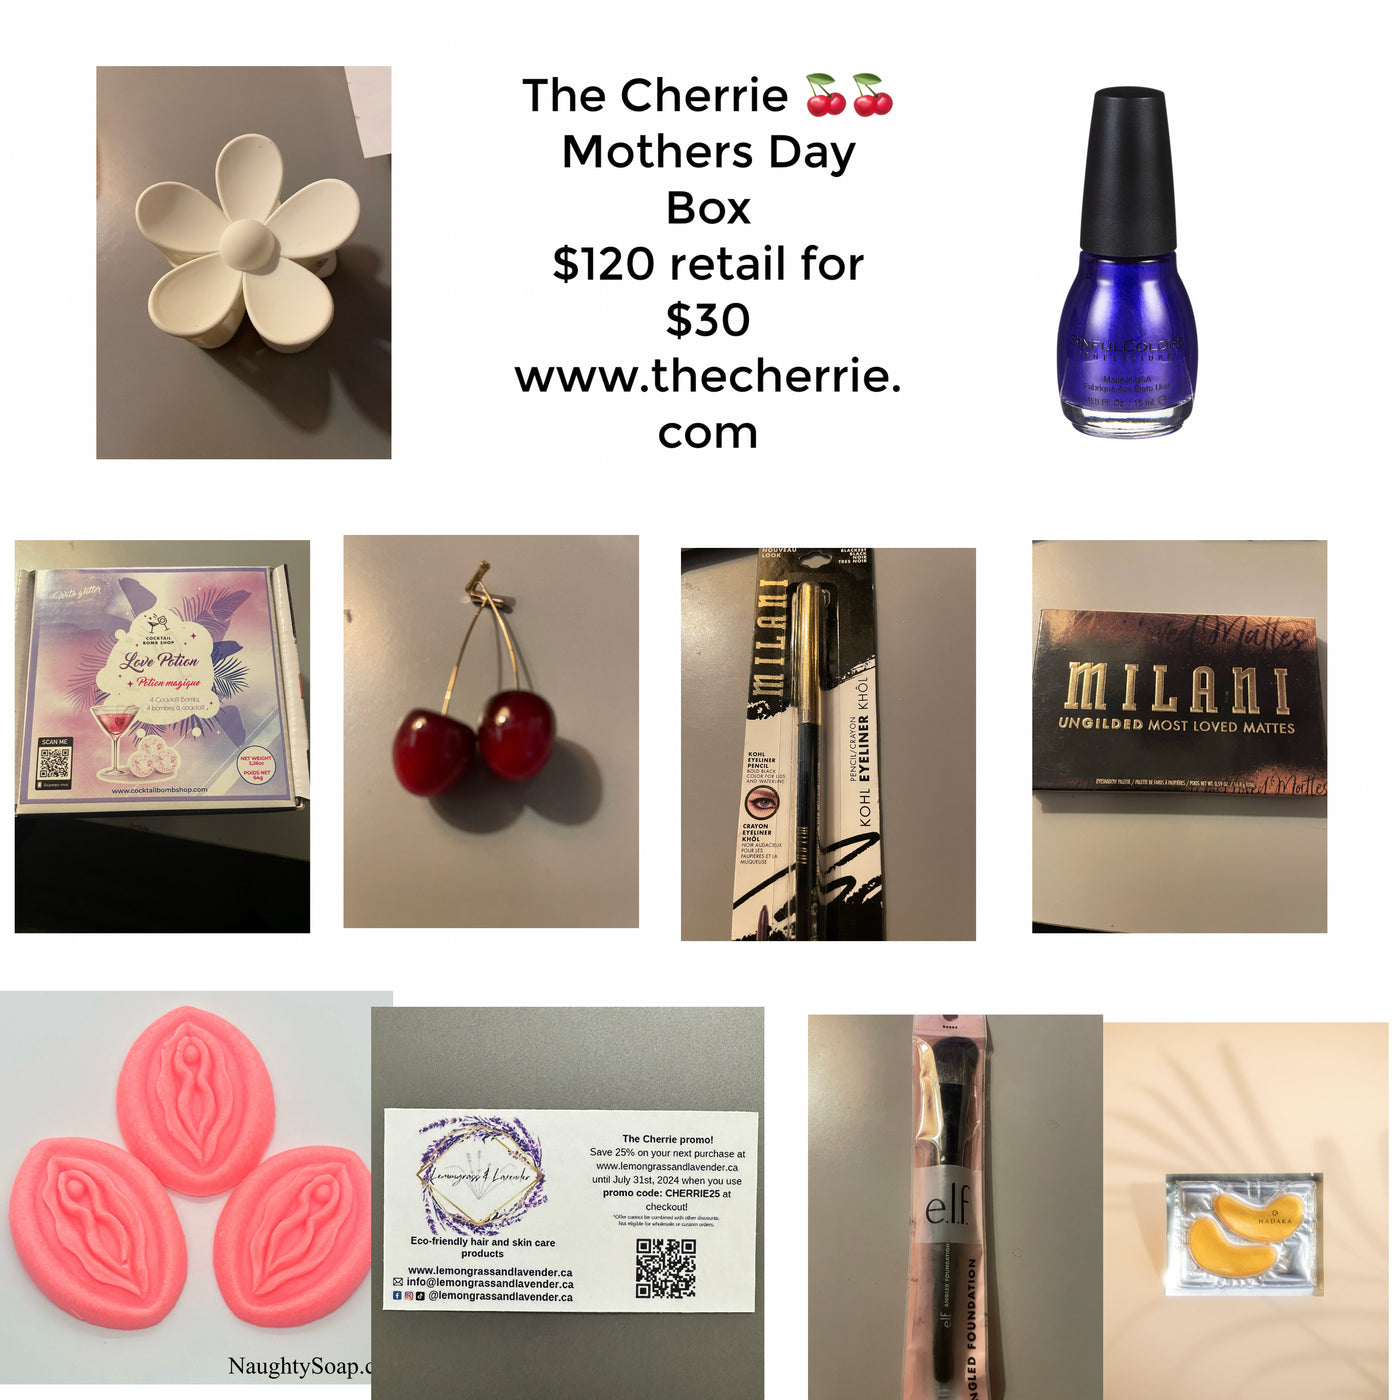 The Cherrie Mothers Day Box